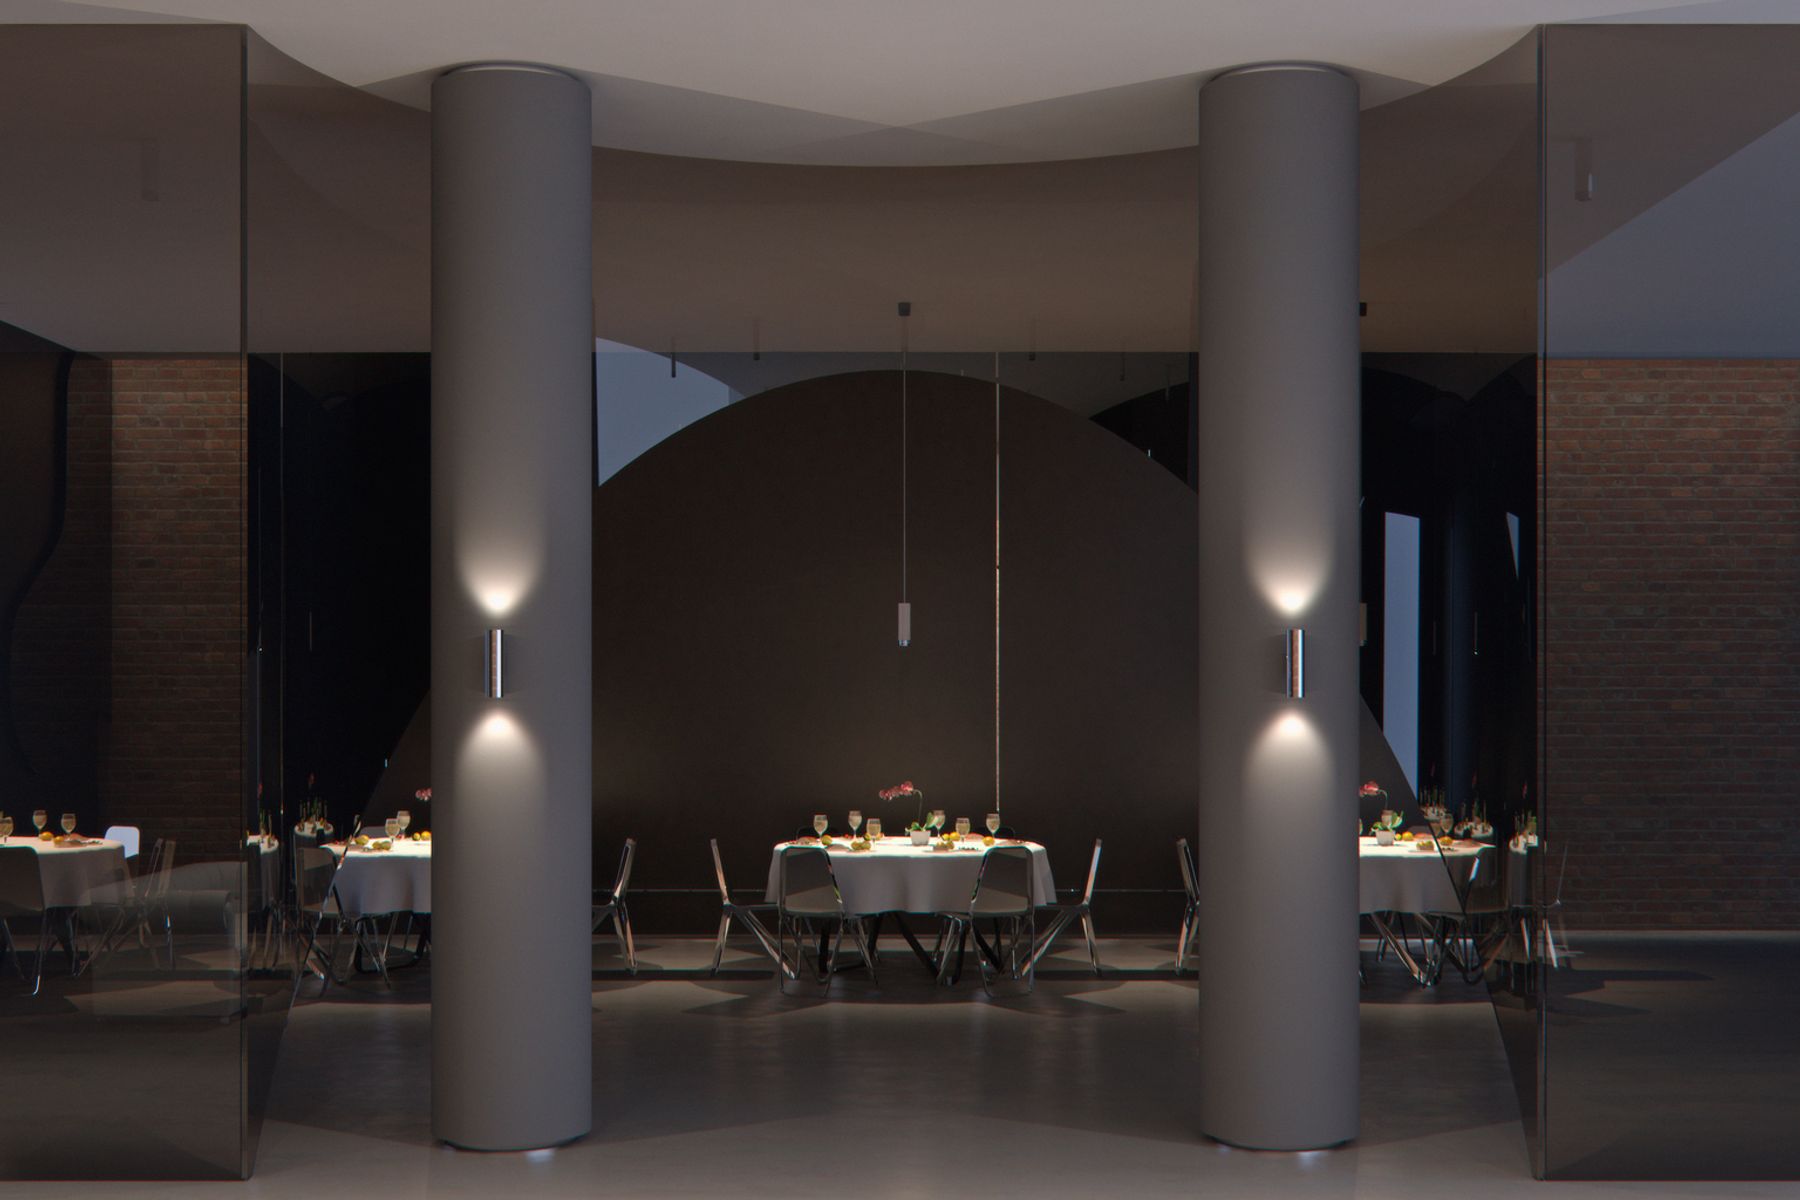 Starpoint wall-mounted luminaires stand for sophisticated design and mood lighting, creating a visual rhythm whilst emphasising vertical architectural features.